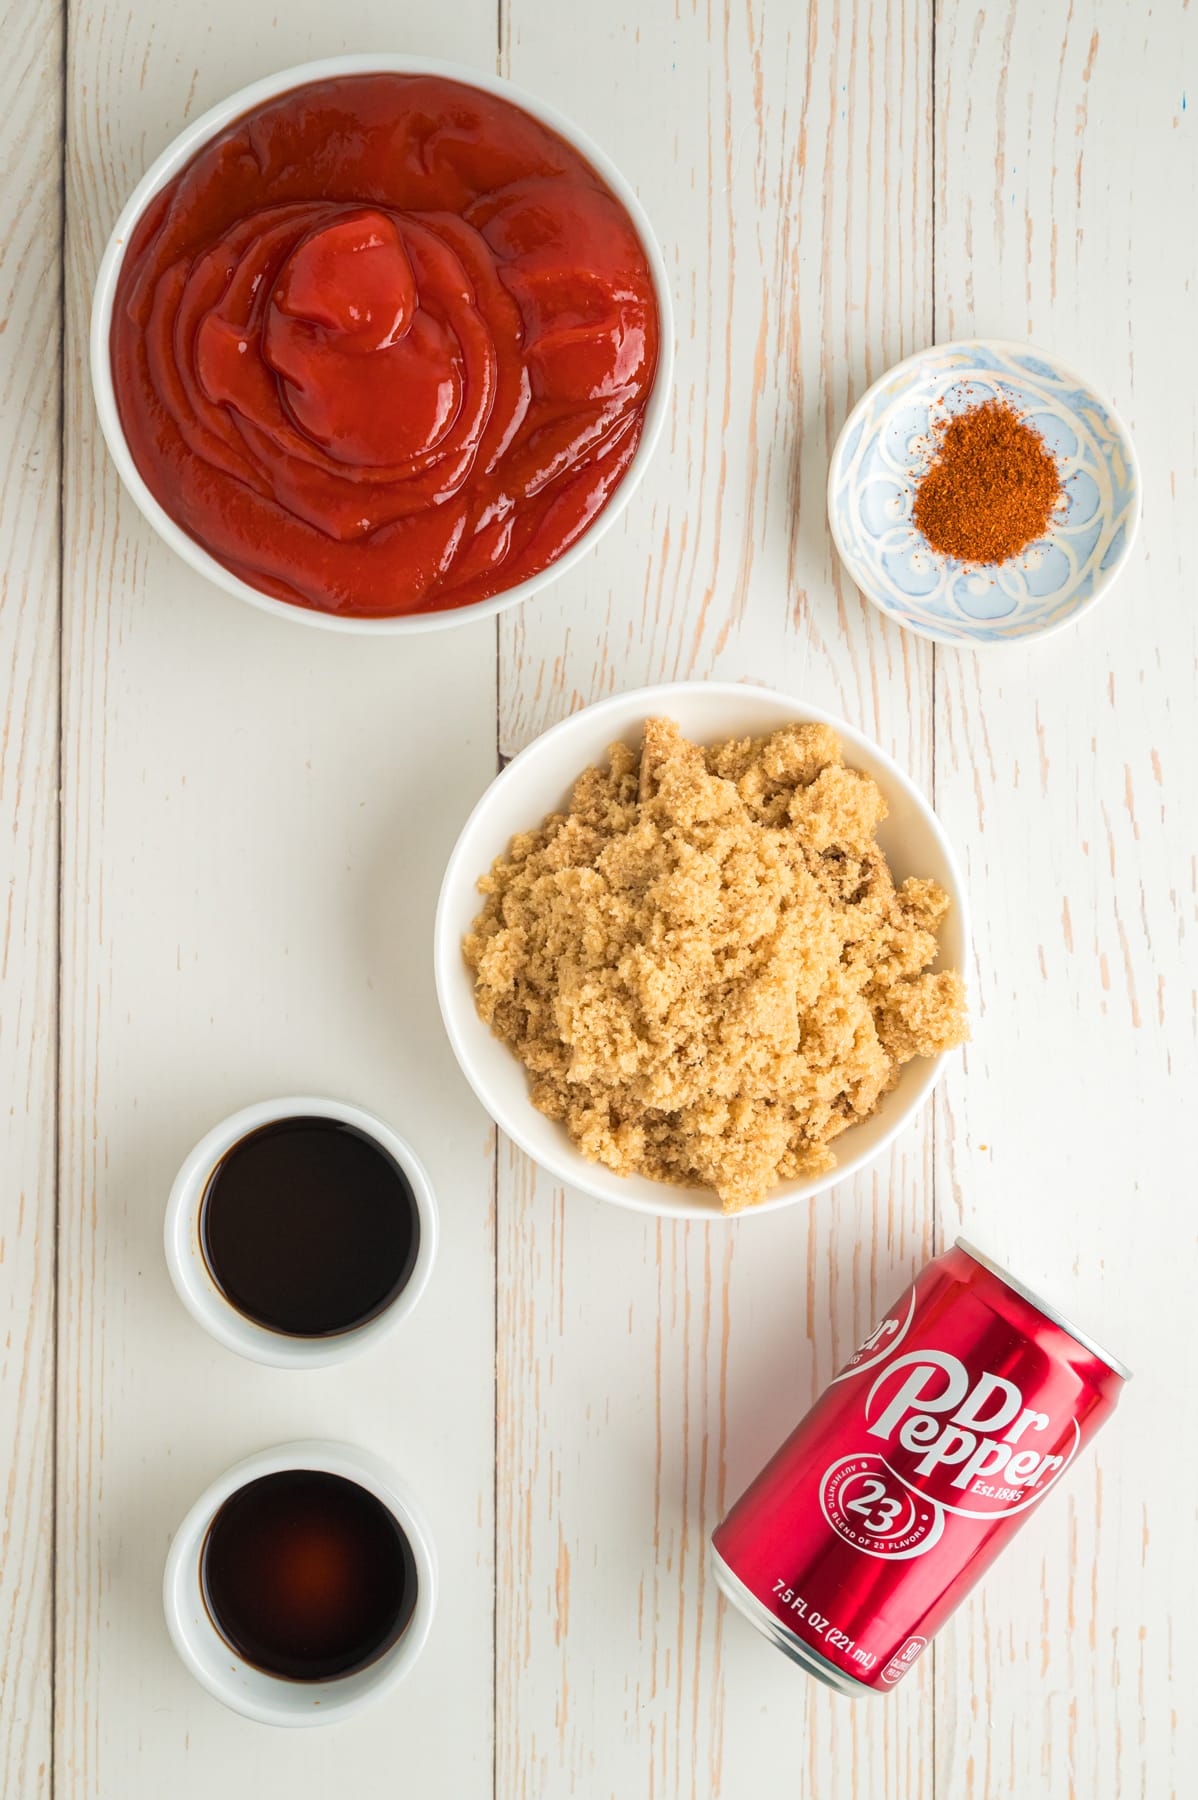 Overhead view of ingredients needed for Dr Pepper BBQ sauce